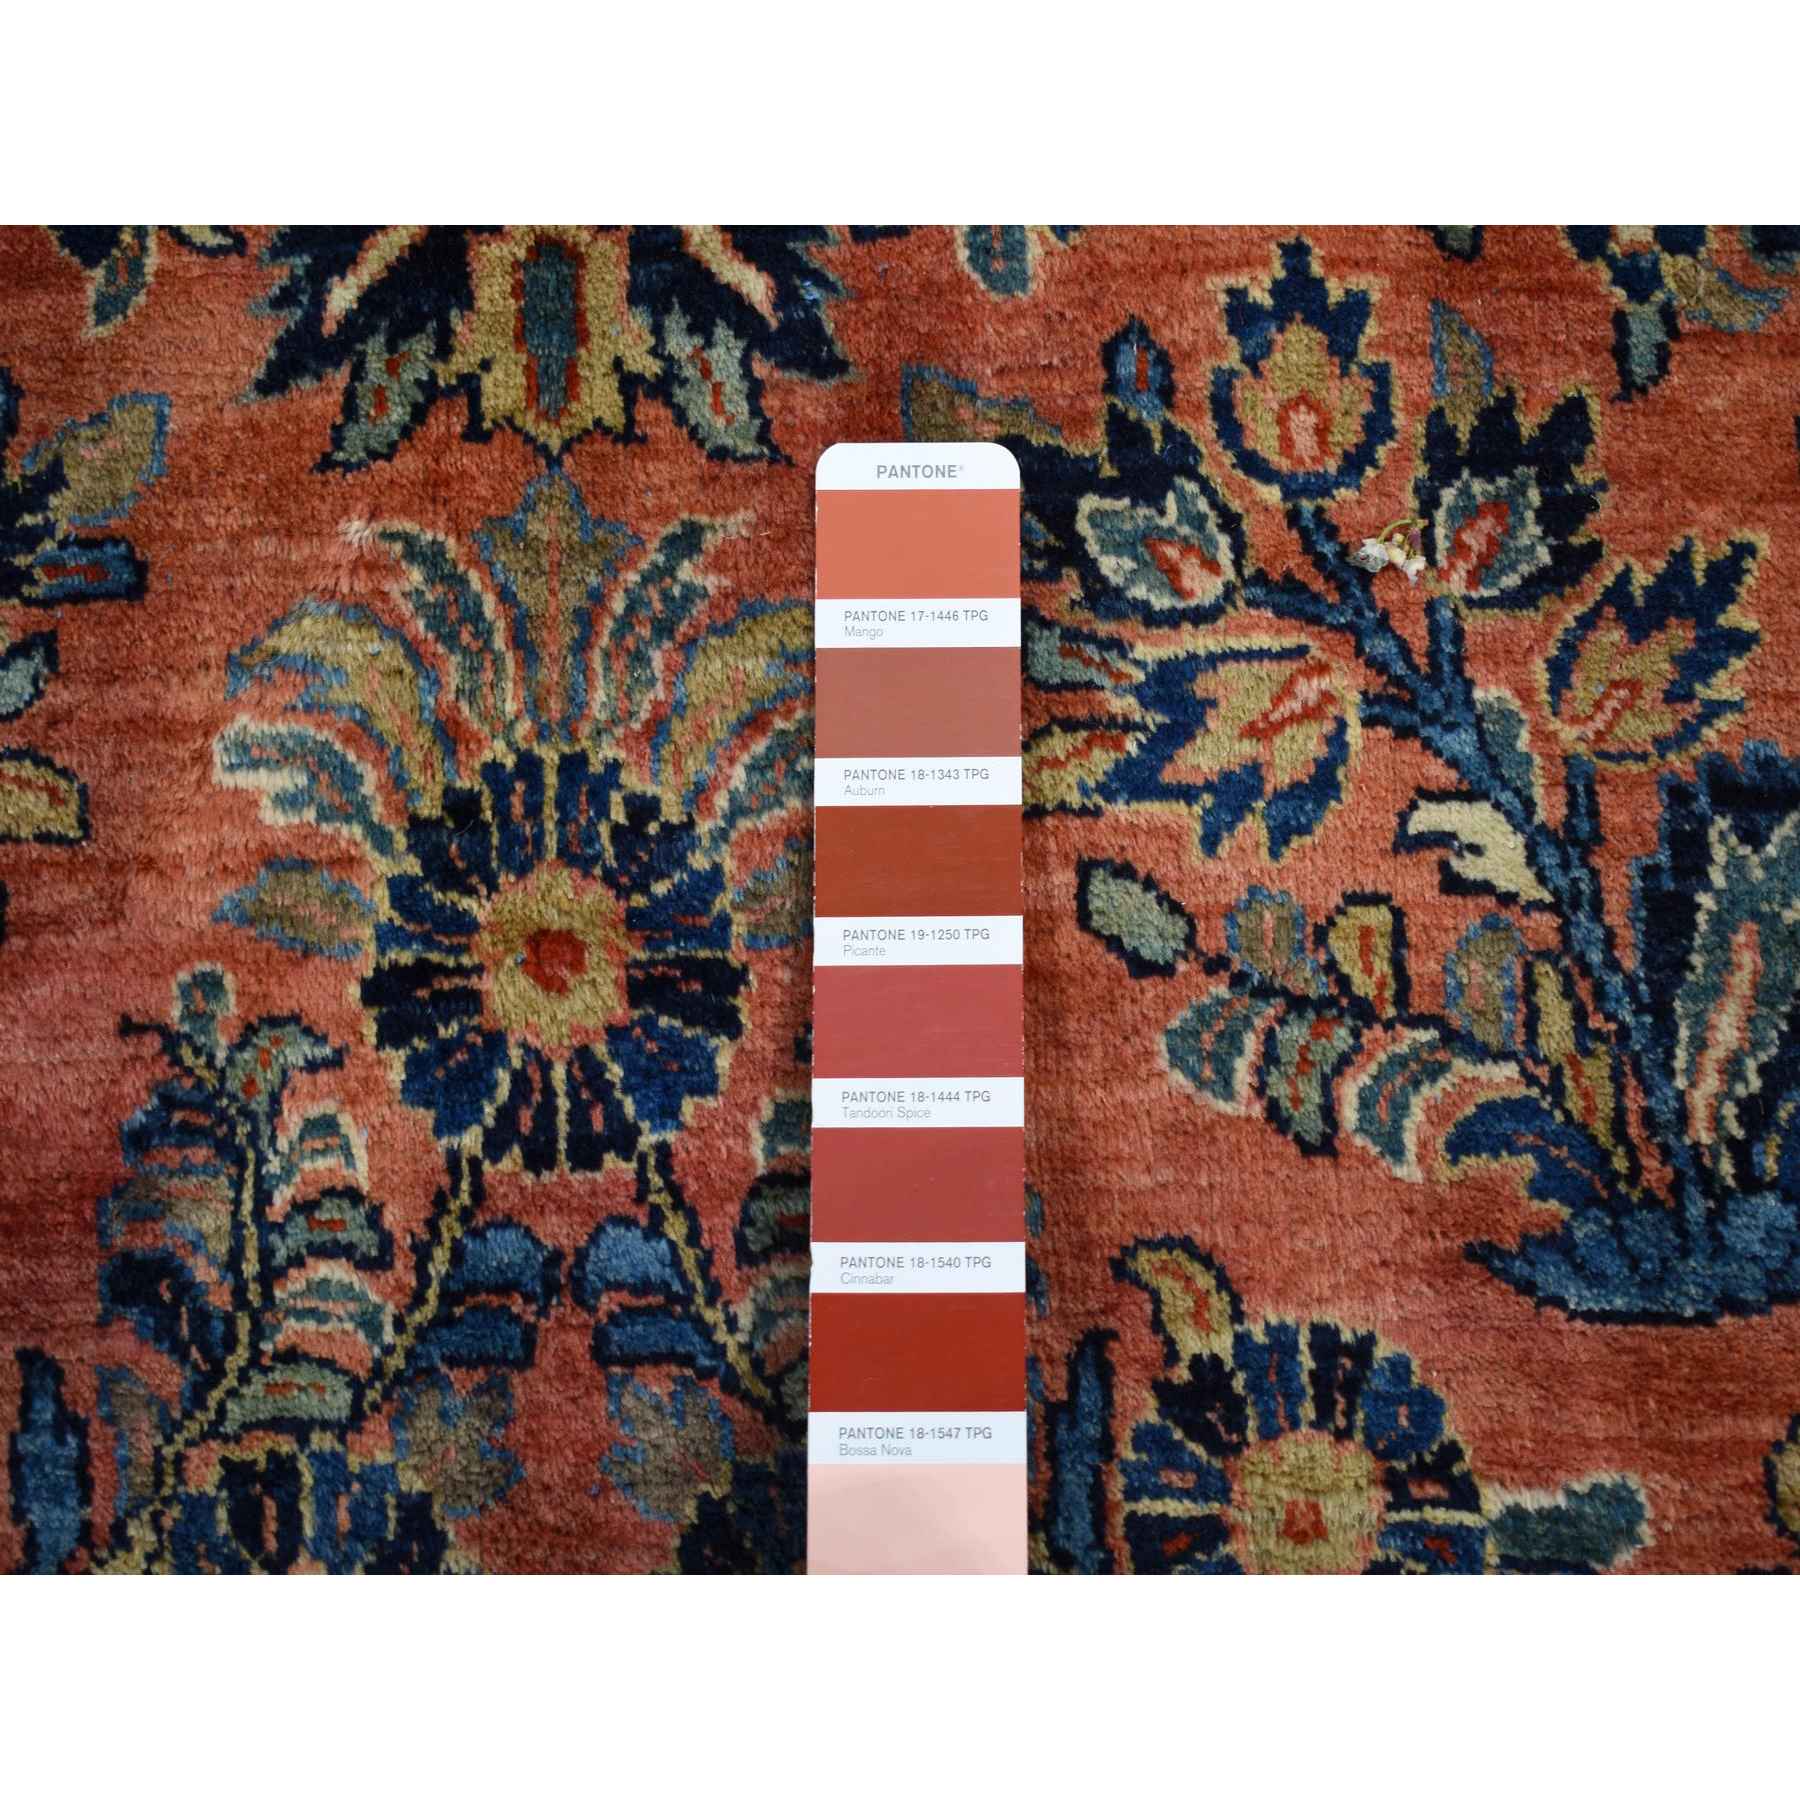 Antique-Hand-Knotted-Rug-437015